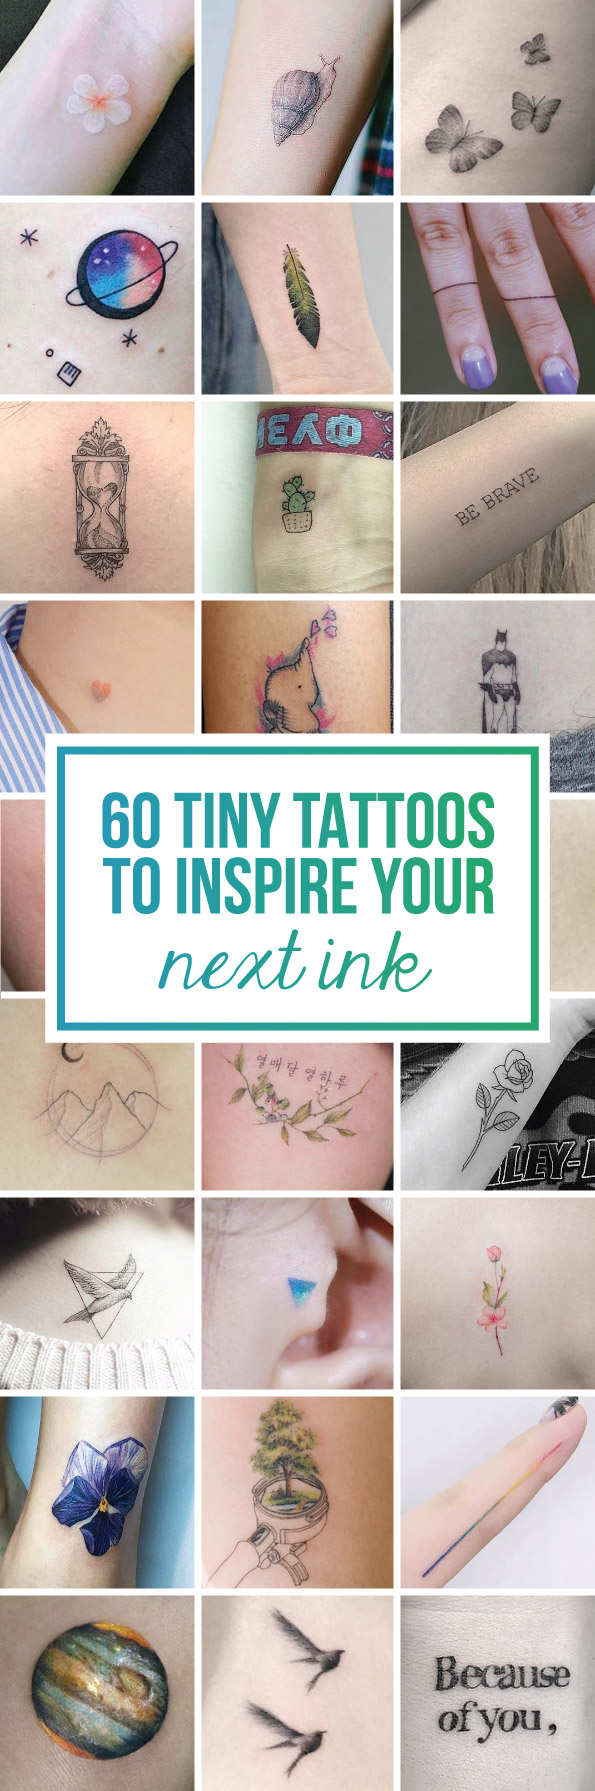 60 Tiny Tattoos To Inspire Your Next Ink | TattooBlend